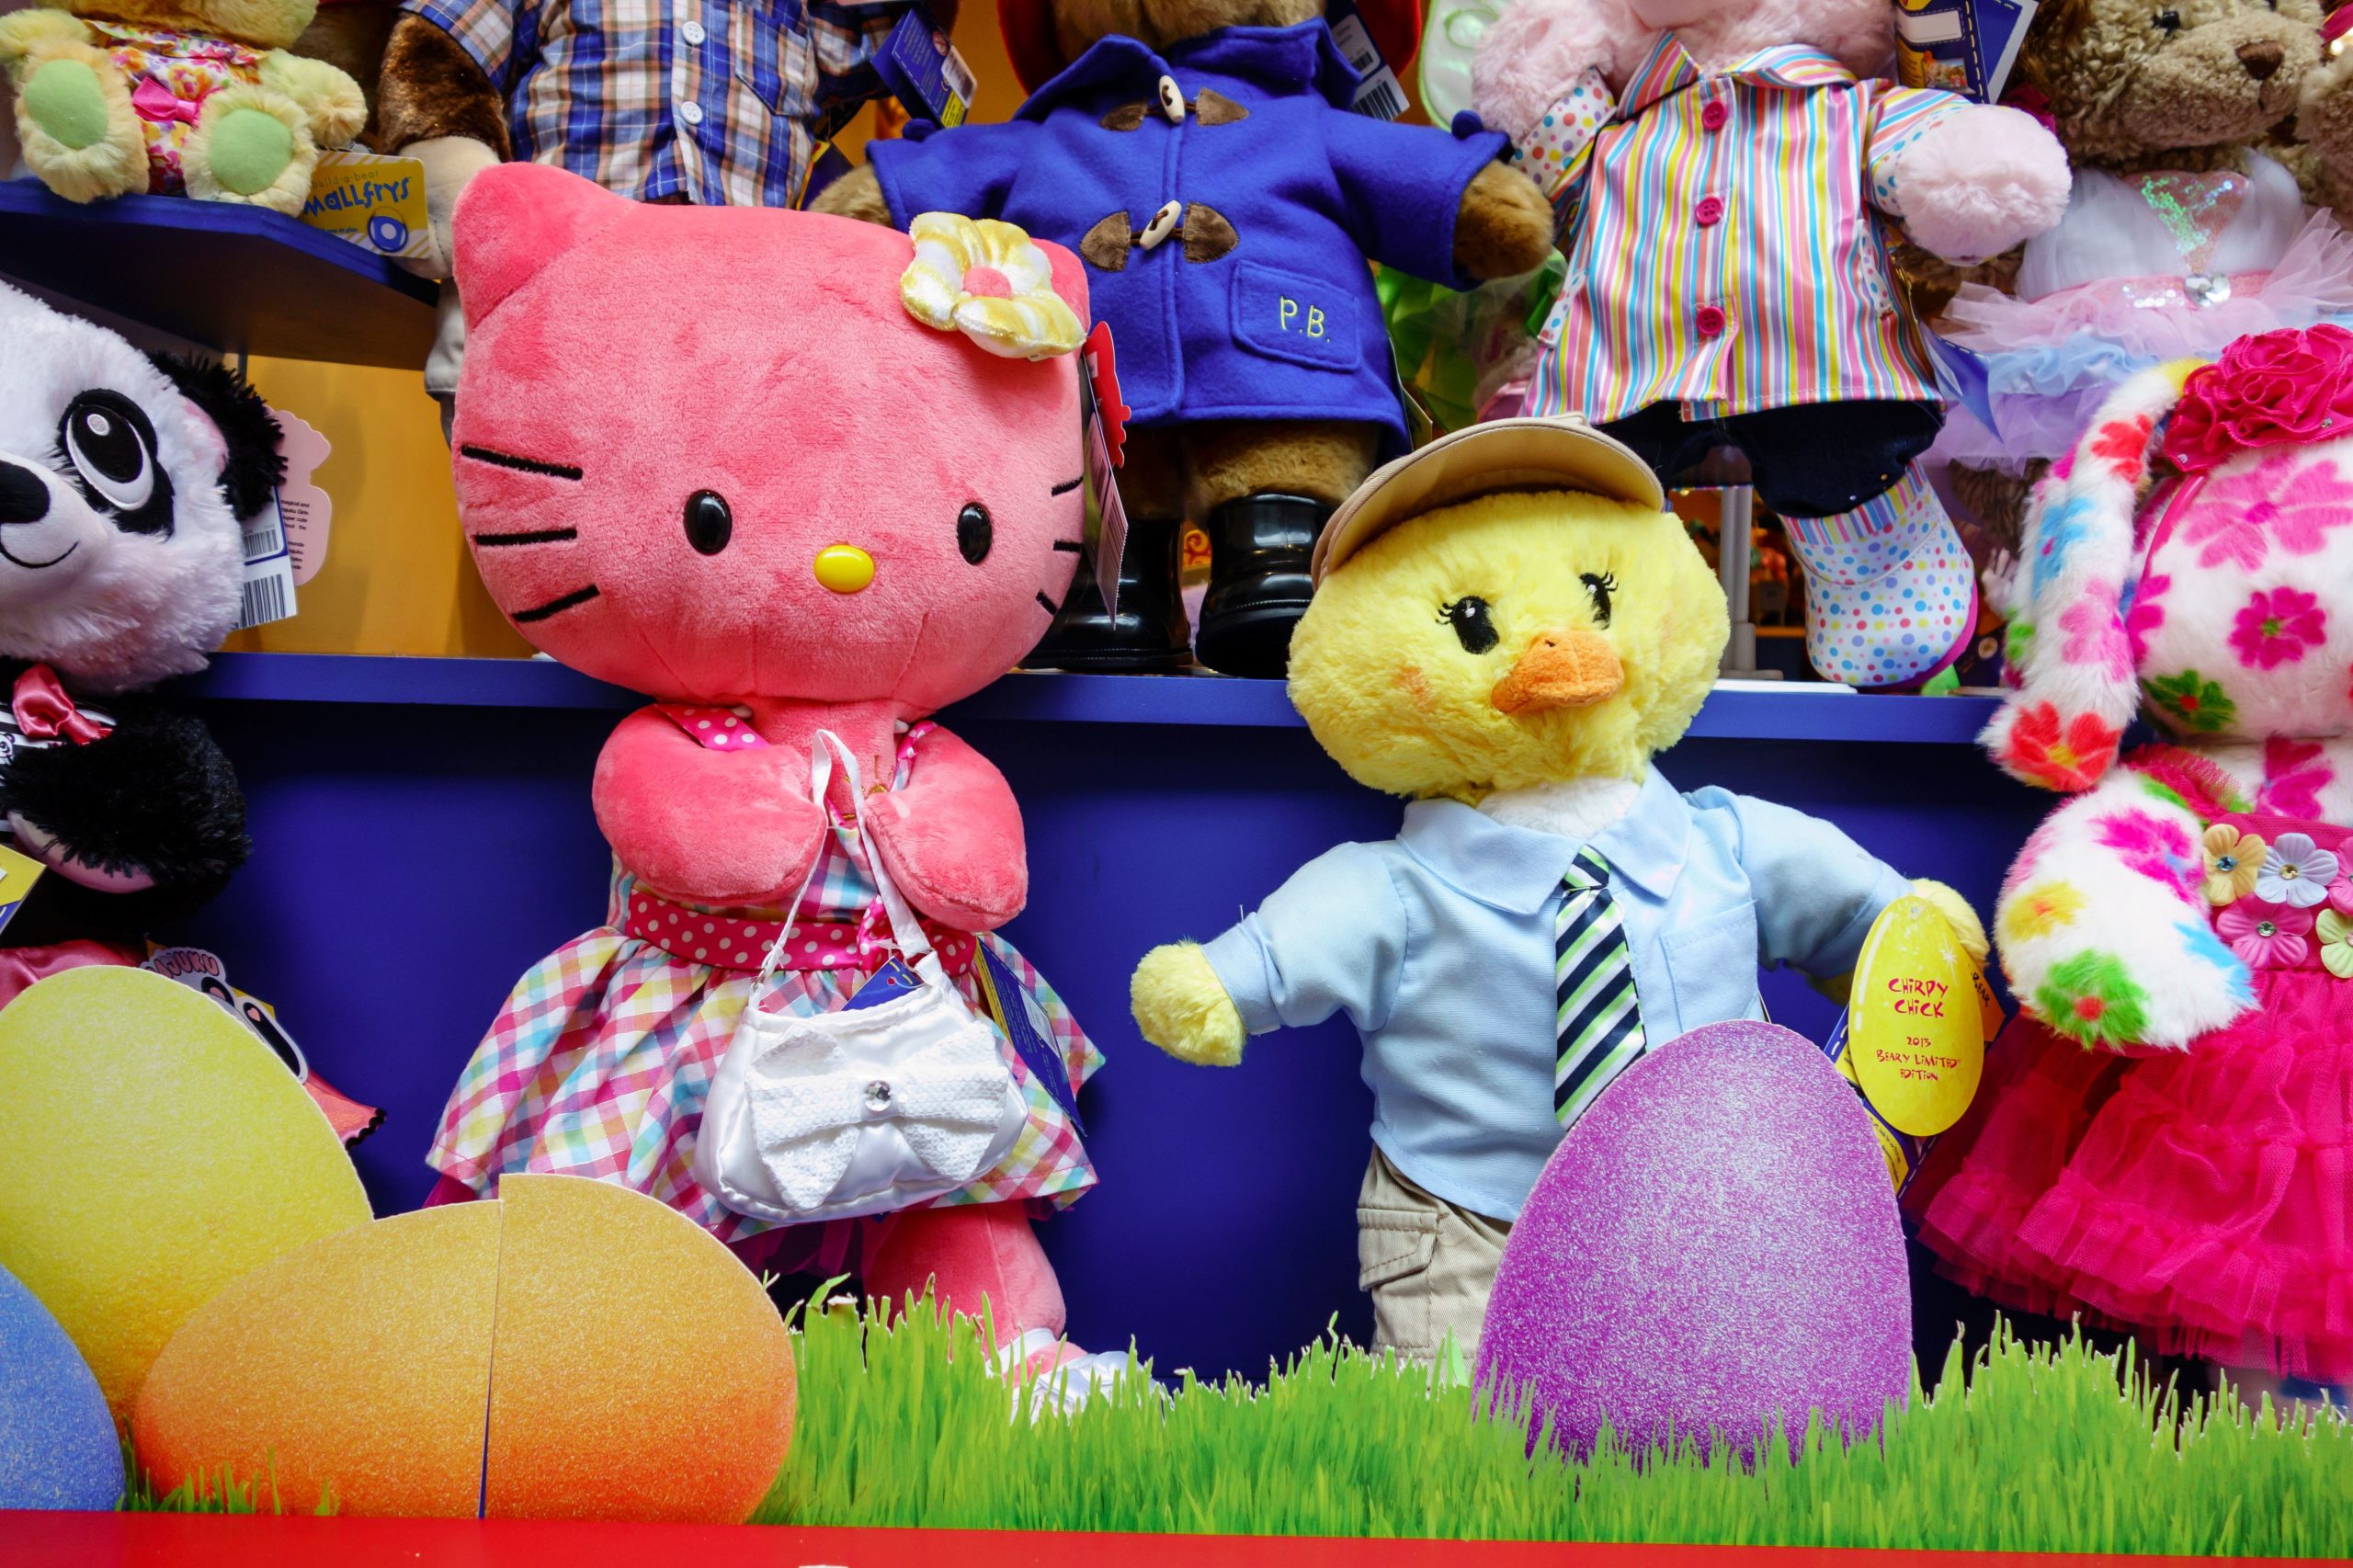 The toy retailer Build-a-Bear has given investors good returns by putting customers, employees and shareholders first